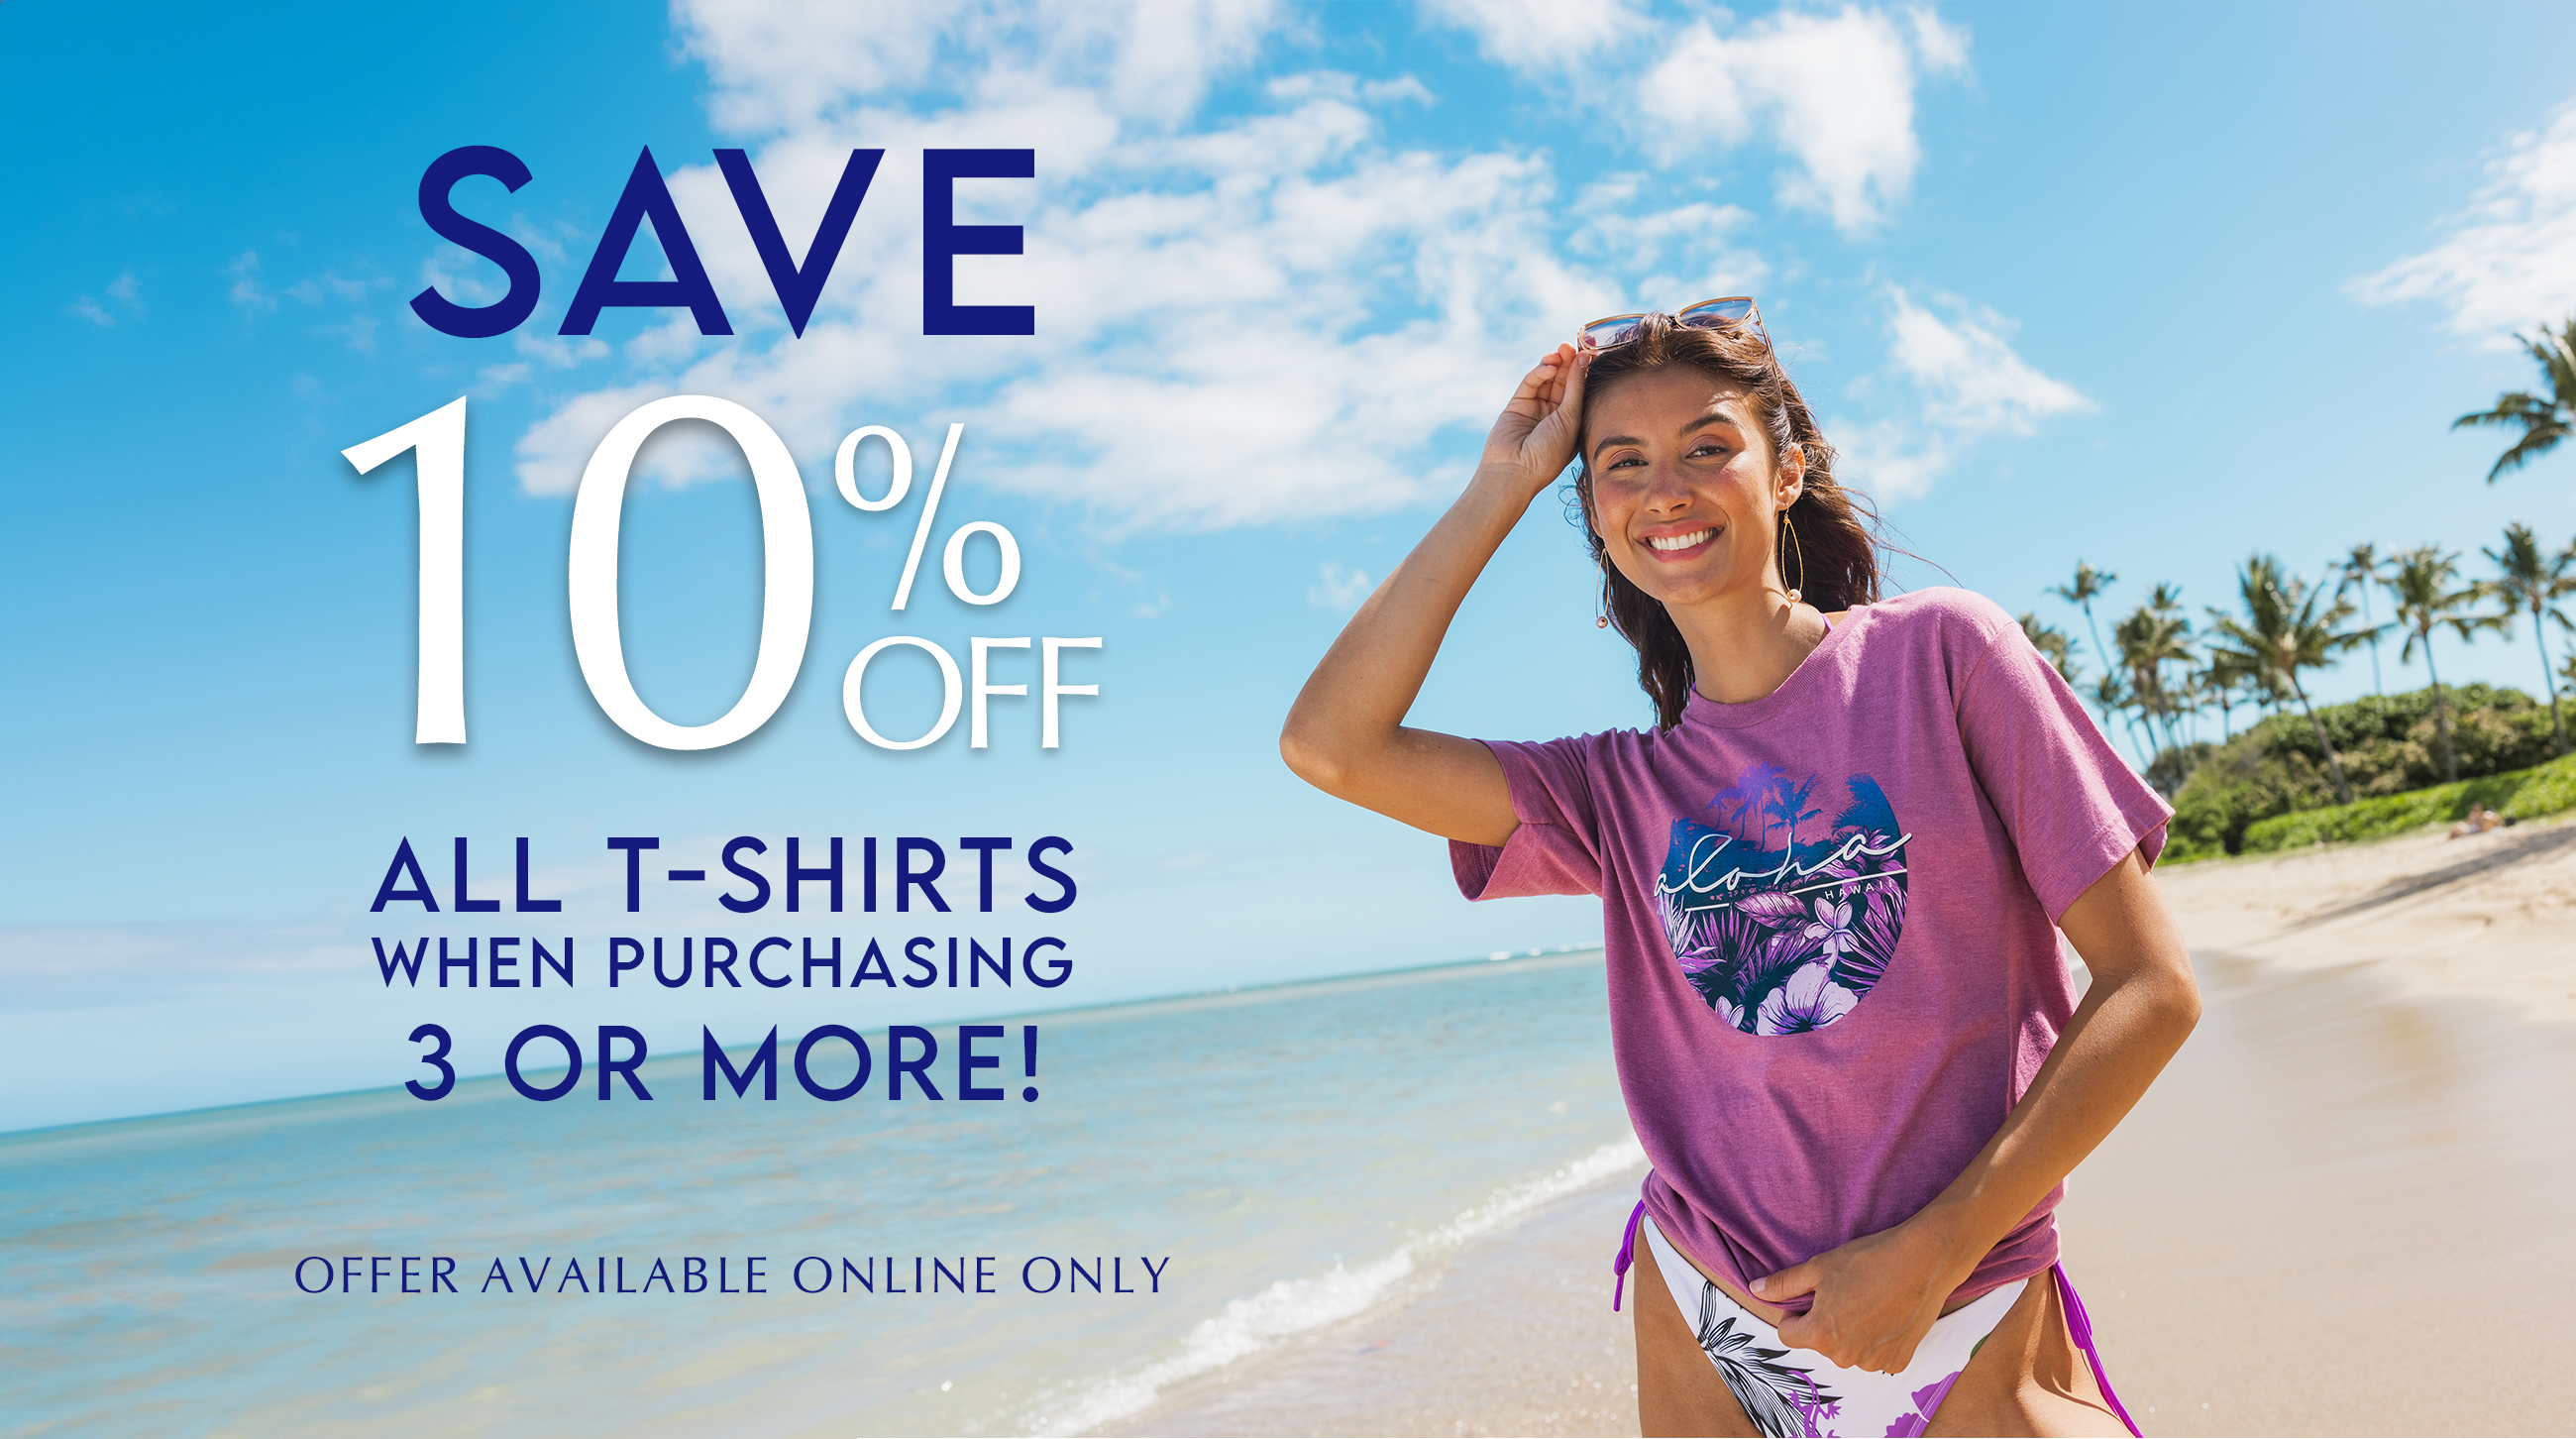 Save 10% Off All T-Shirts When Purchasing 3 or More!